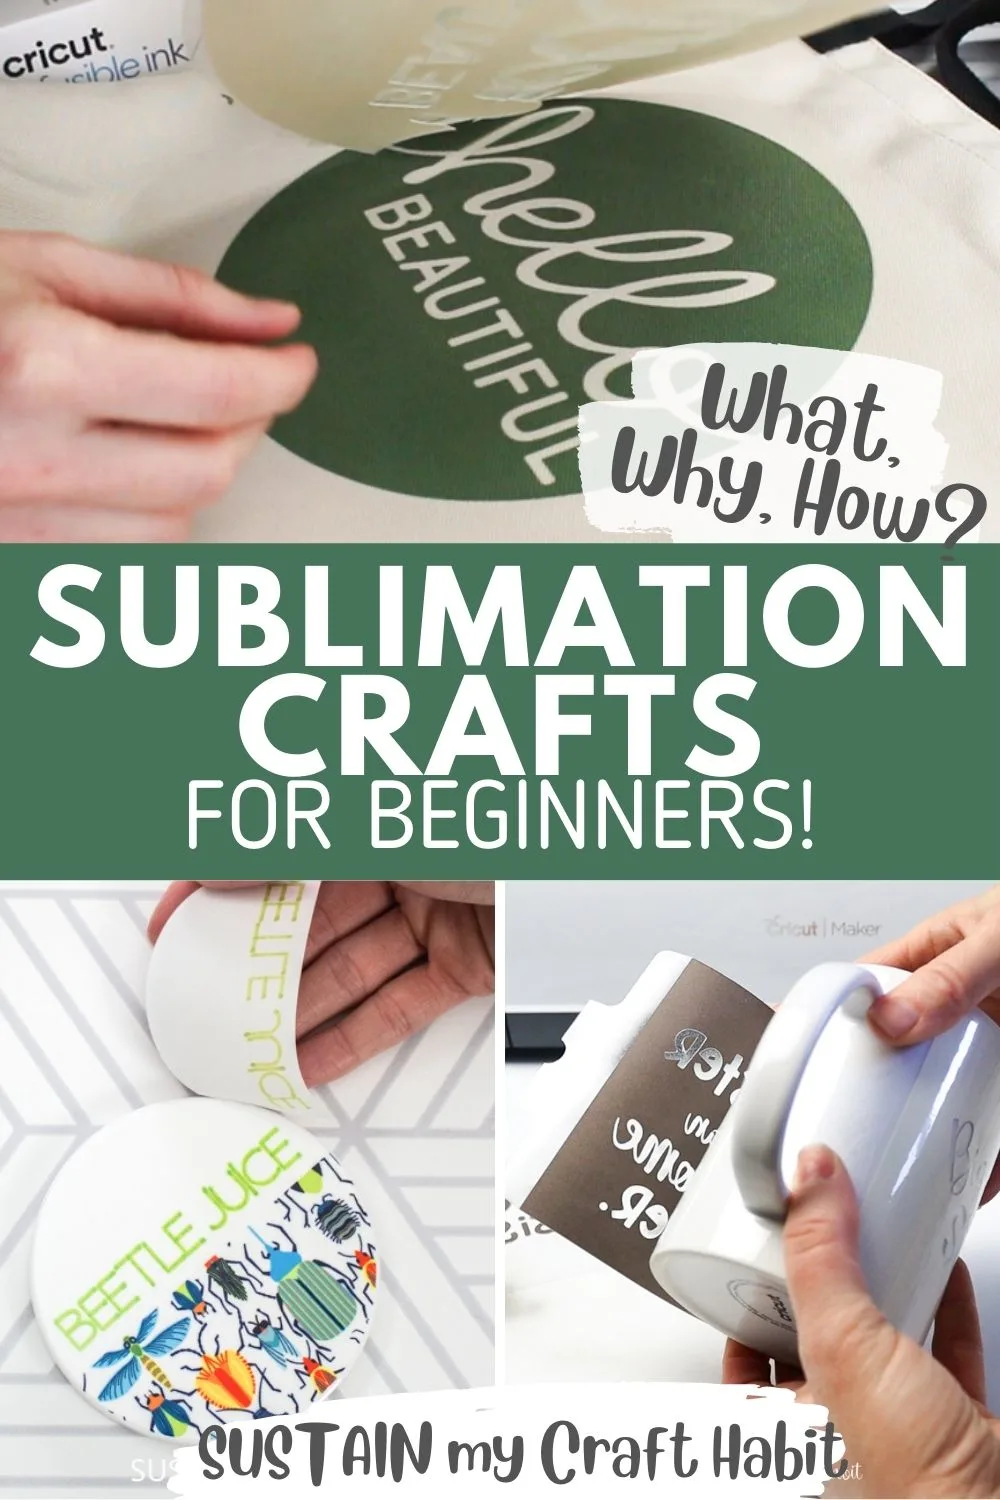 7 Must-Know Techniques for Cricut Sublimation for Beginners 